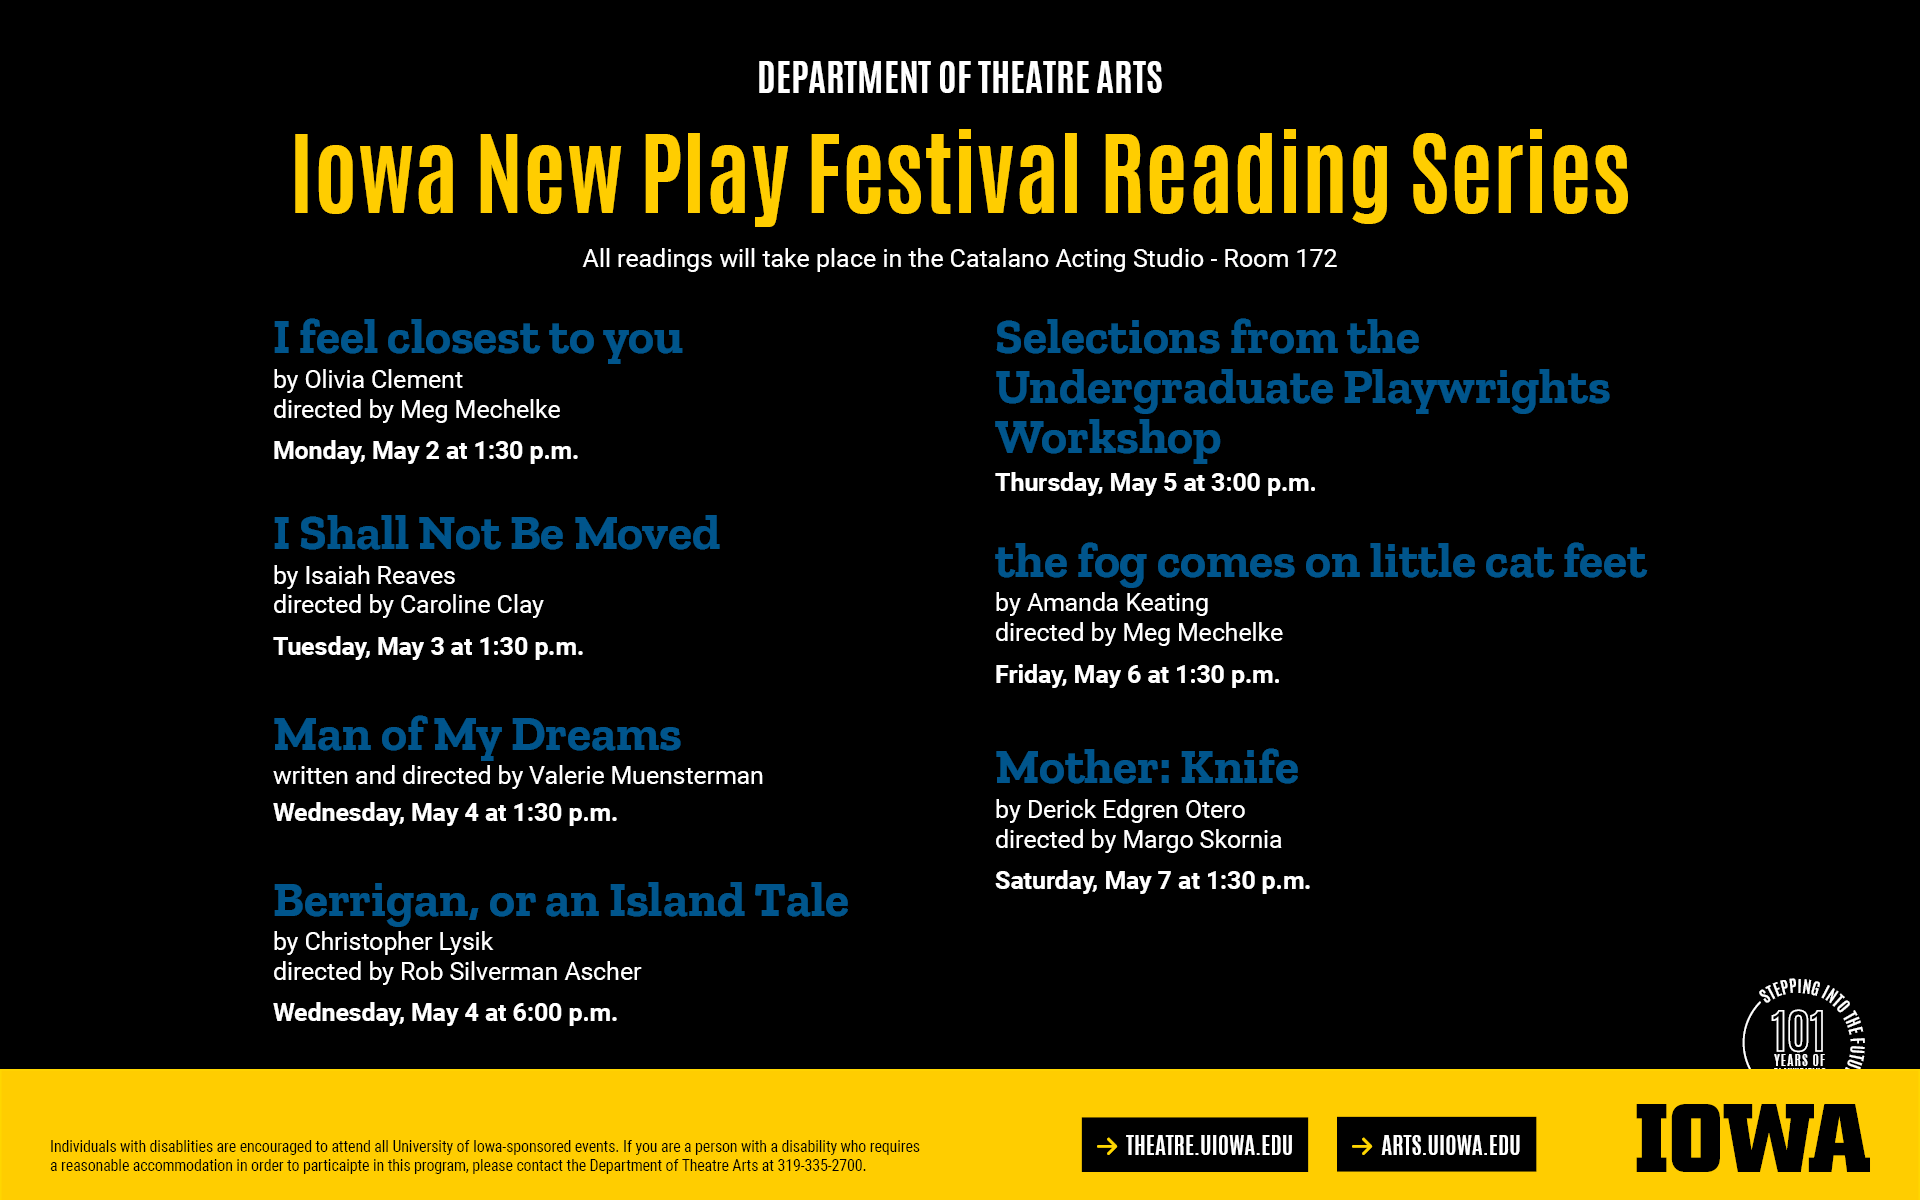 Iowa New Play Festival Reading Series. All readings will take place in Room 172. Visit theatre.uiowa.edu/production/new-play-festival for the complete lineup.Individuals with disablities are encouraged to attend all University of Iowa-sponsored events. If you are a person with a disability who requires  a reasonable accommodation in order to particaipte in this program, please contact the Department of Theatre Arts at 319-335-2700.